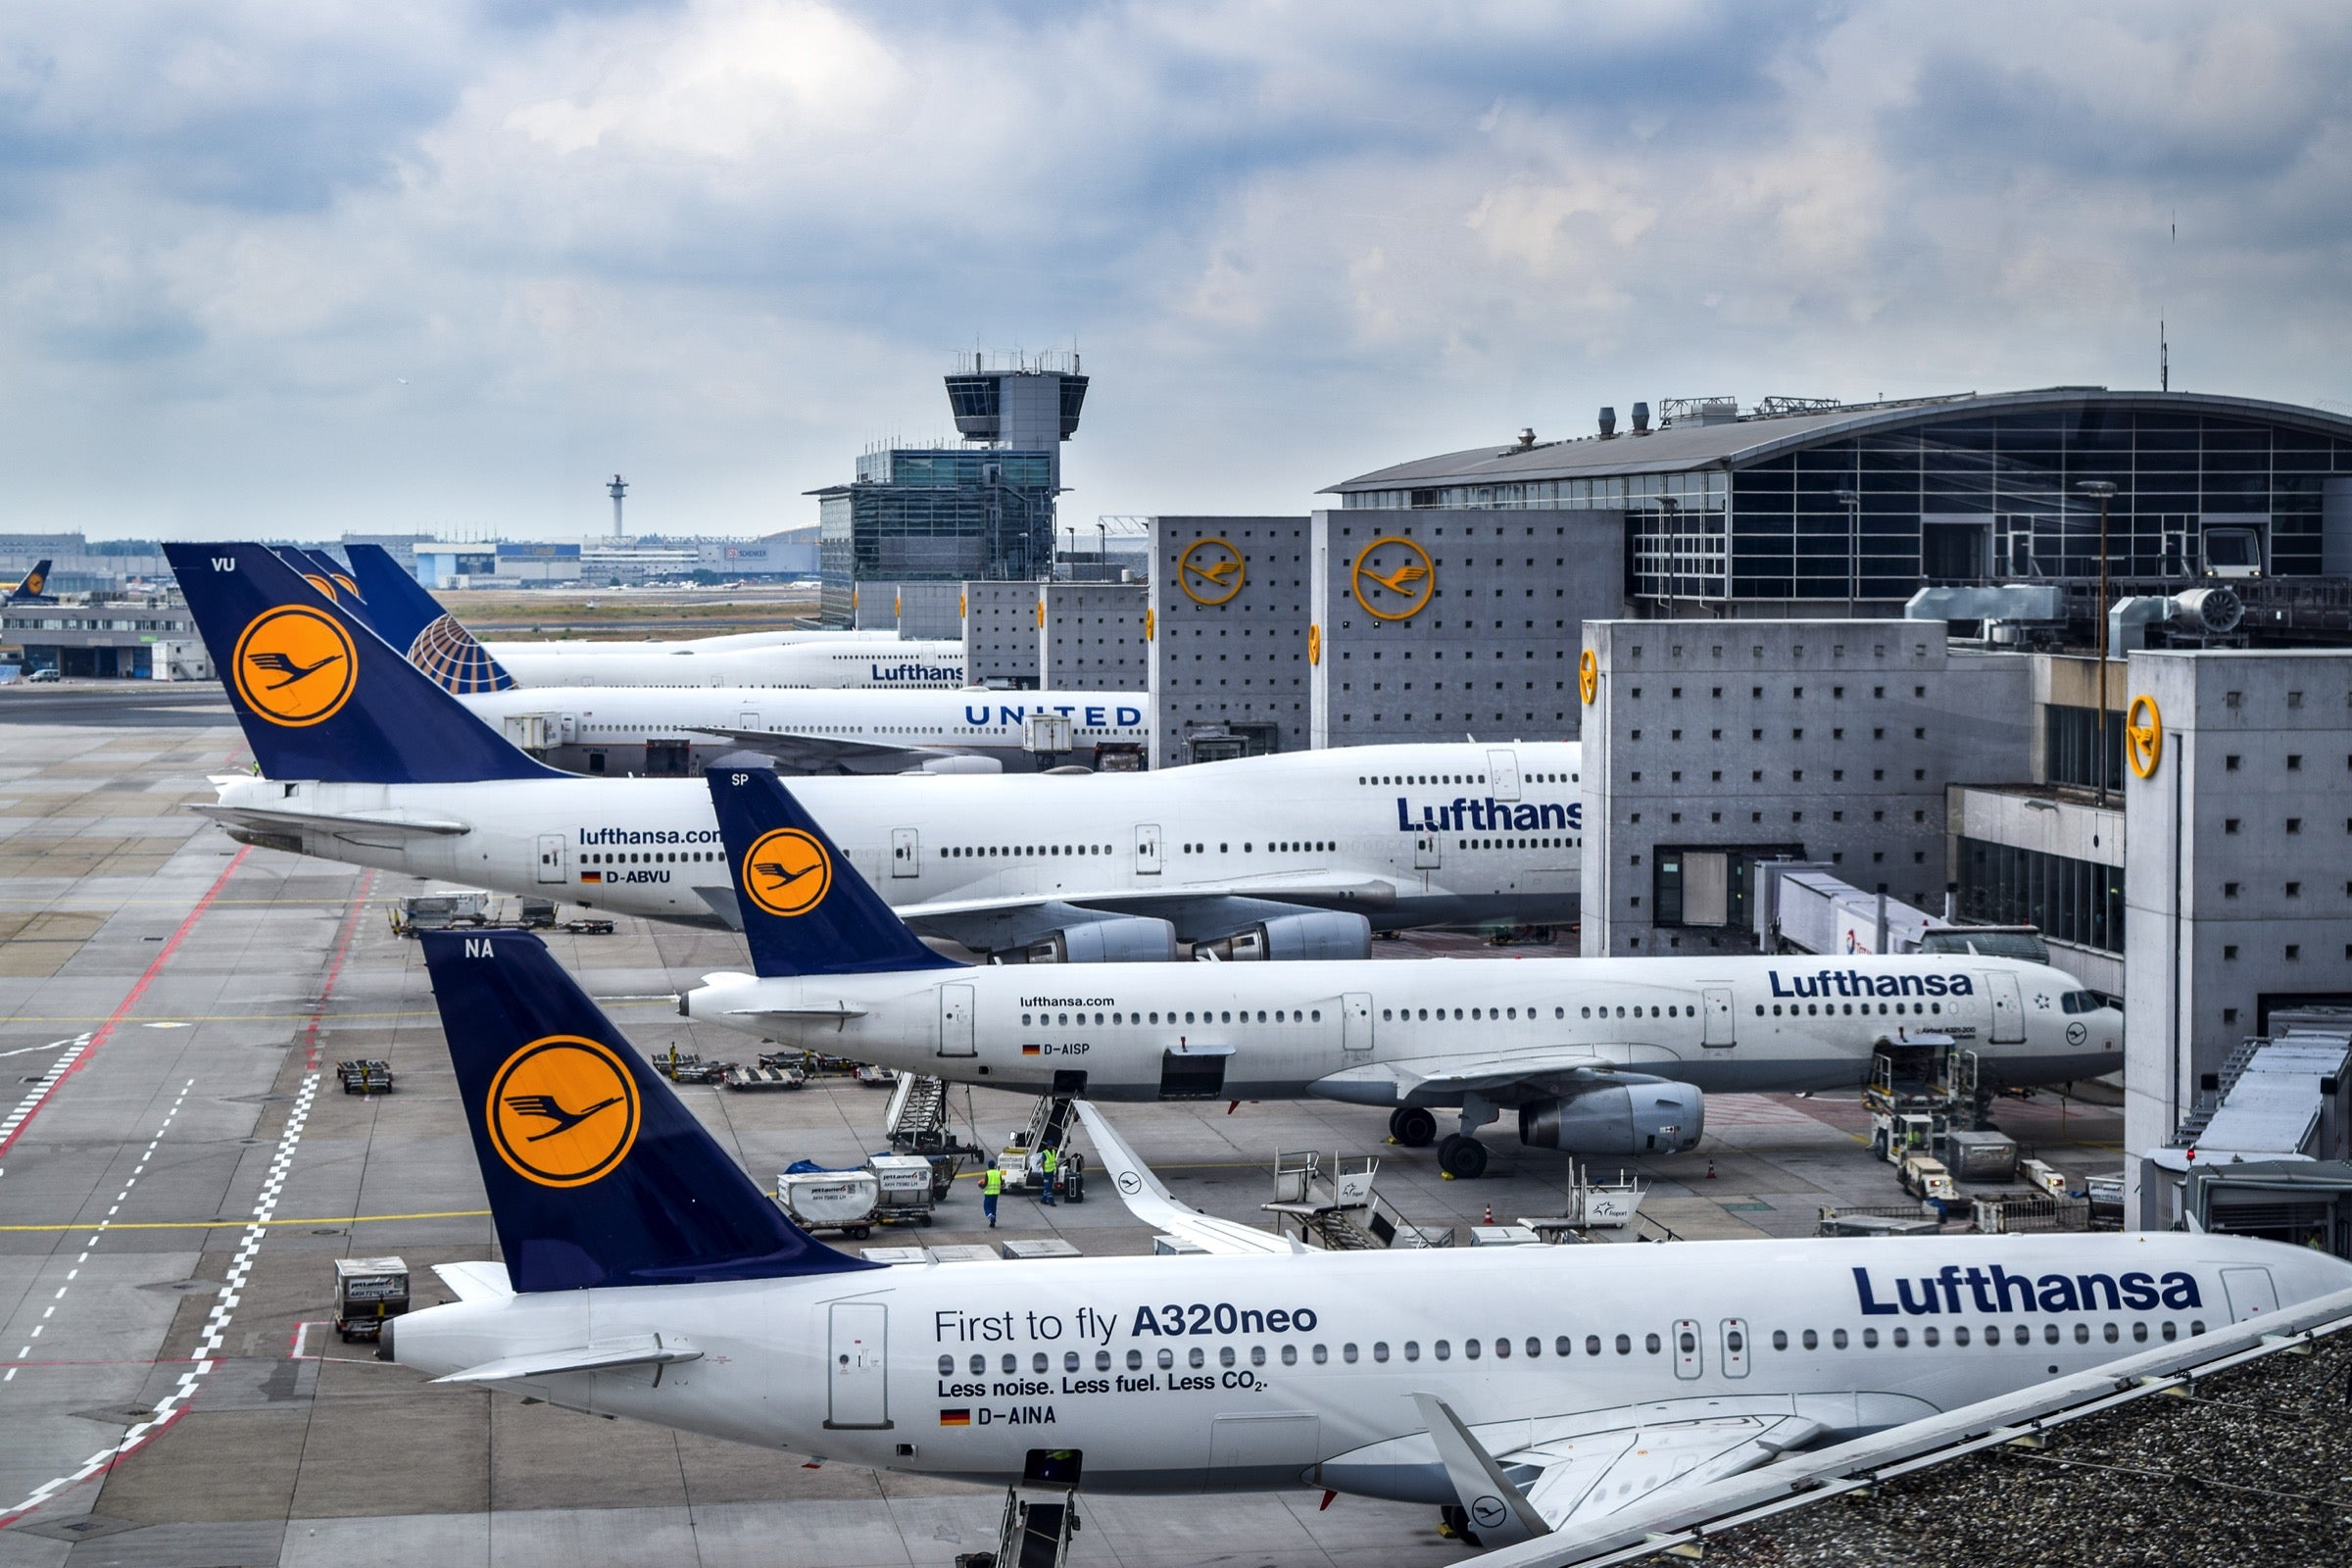 MileagePlus members can't book most Lufthansa award space — here’s what we know